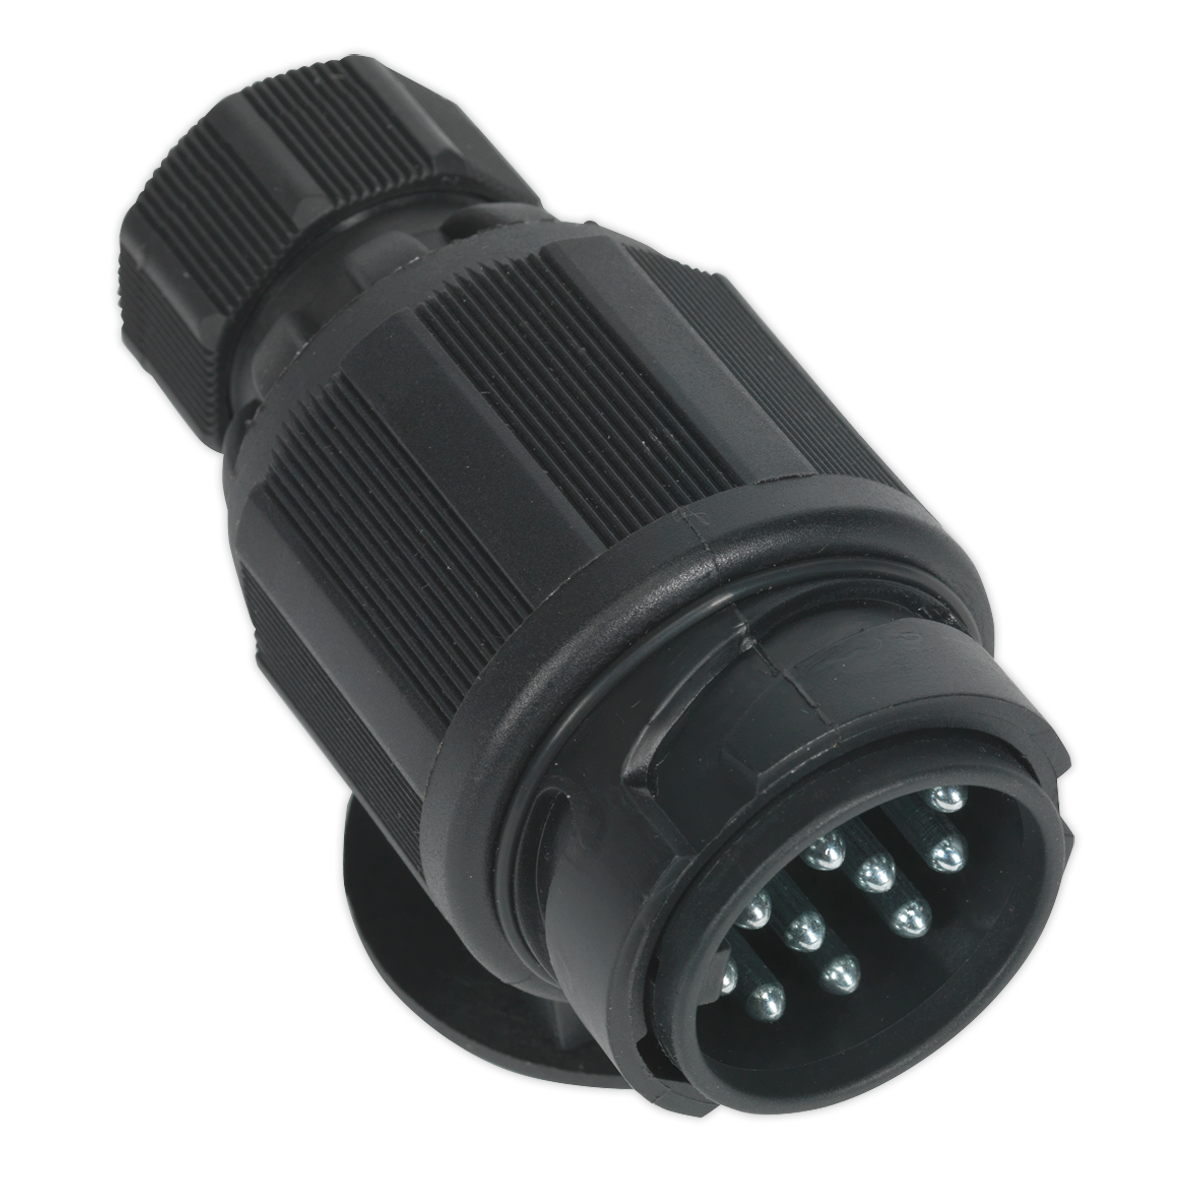 Towing Plug 13-Pin Euro Plastic 12V Twin Inlet